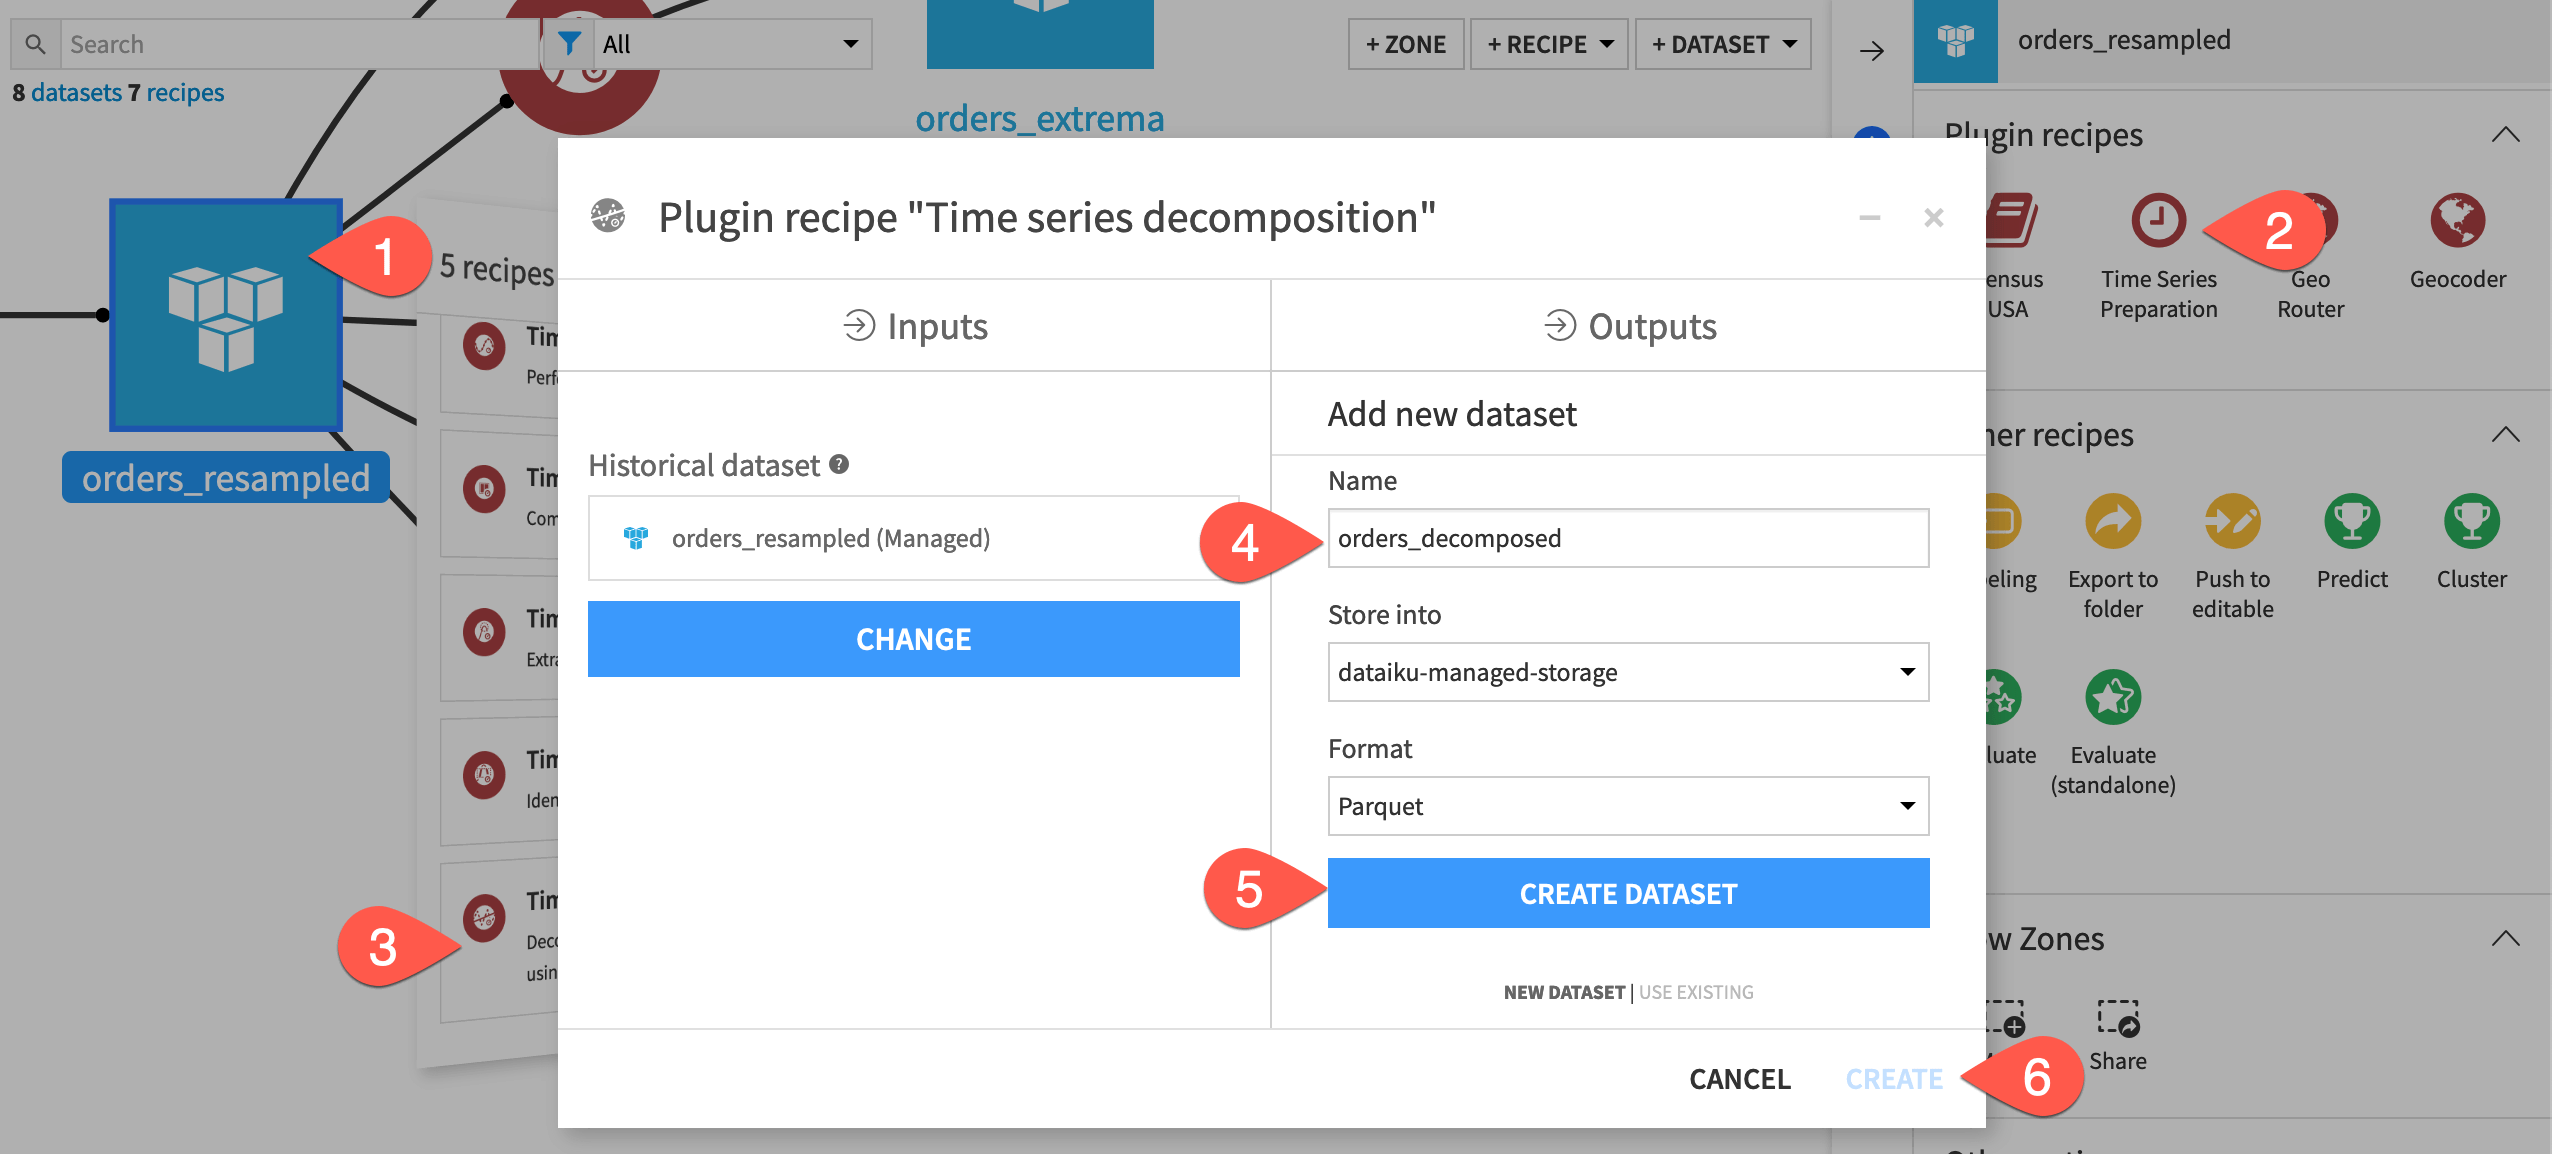 Dataiku screenshot of the dialog for creating a time series decomposition recipe.